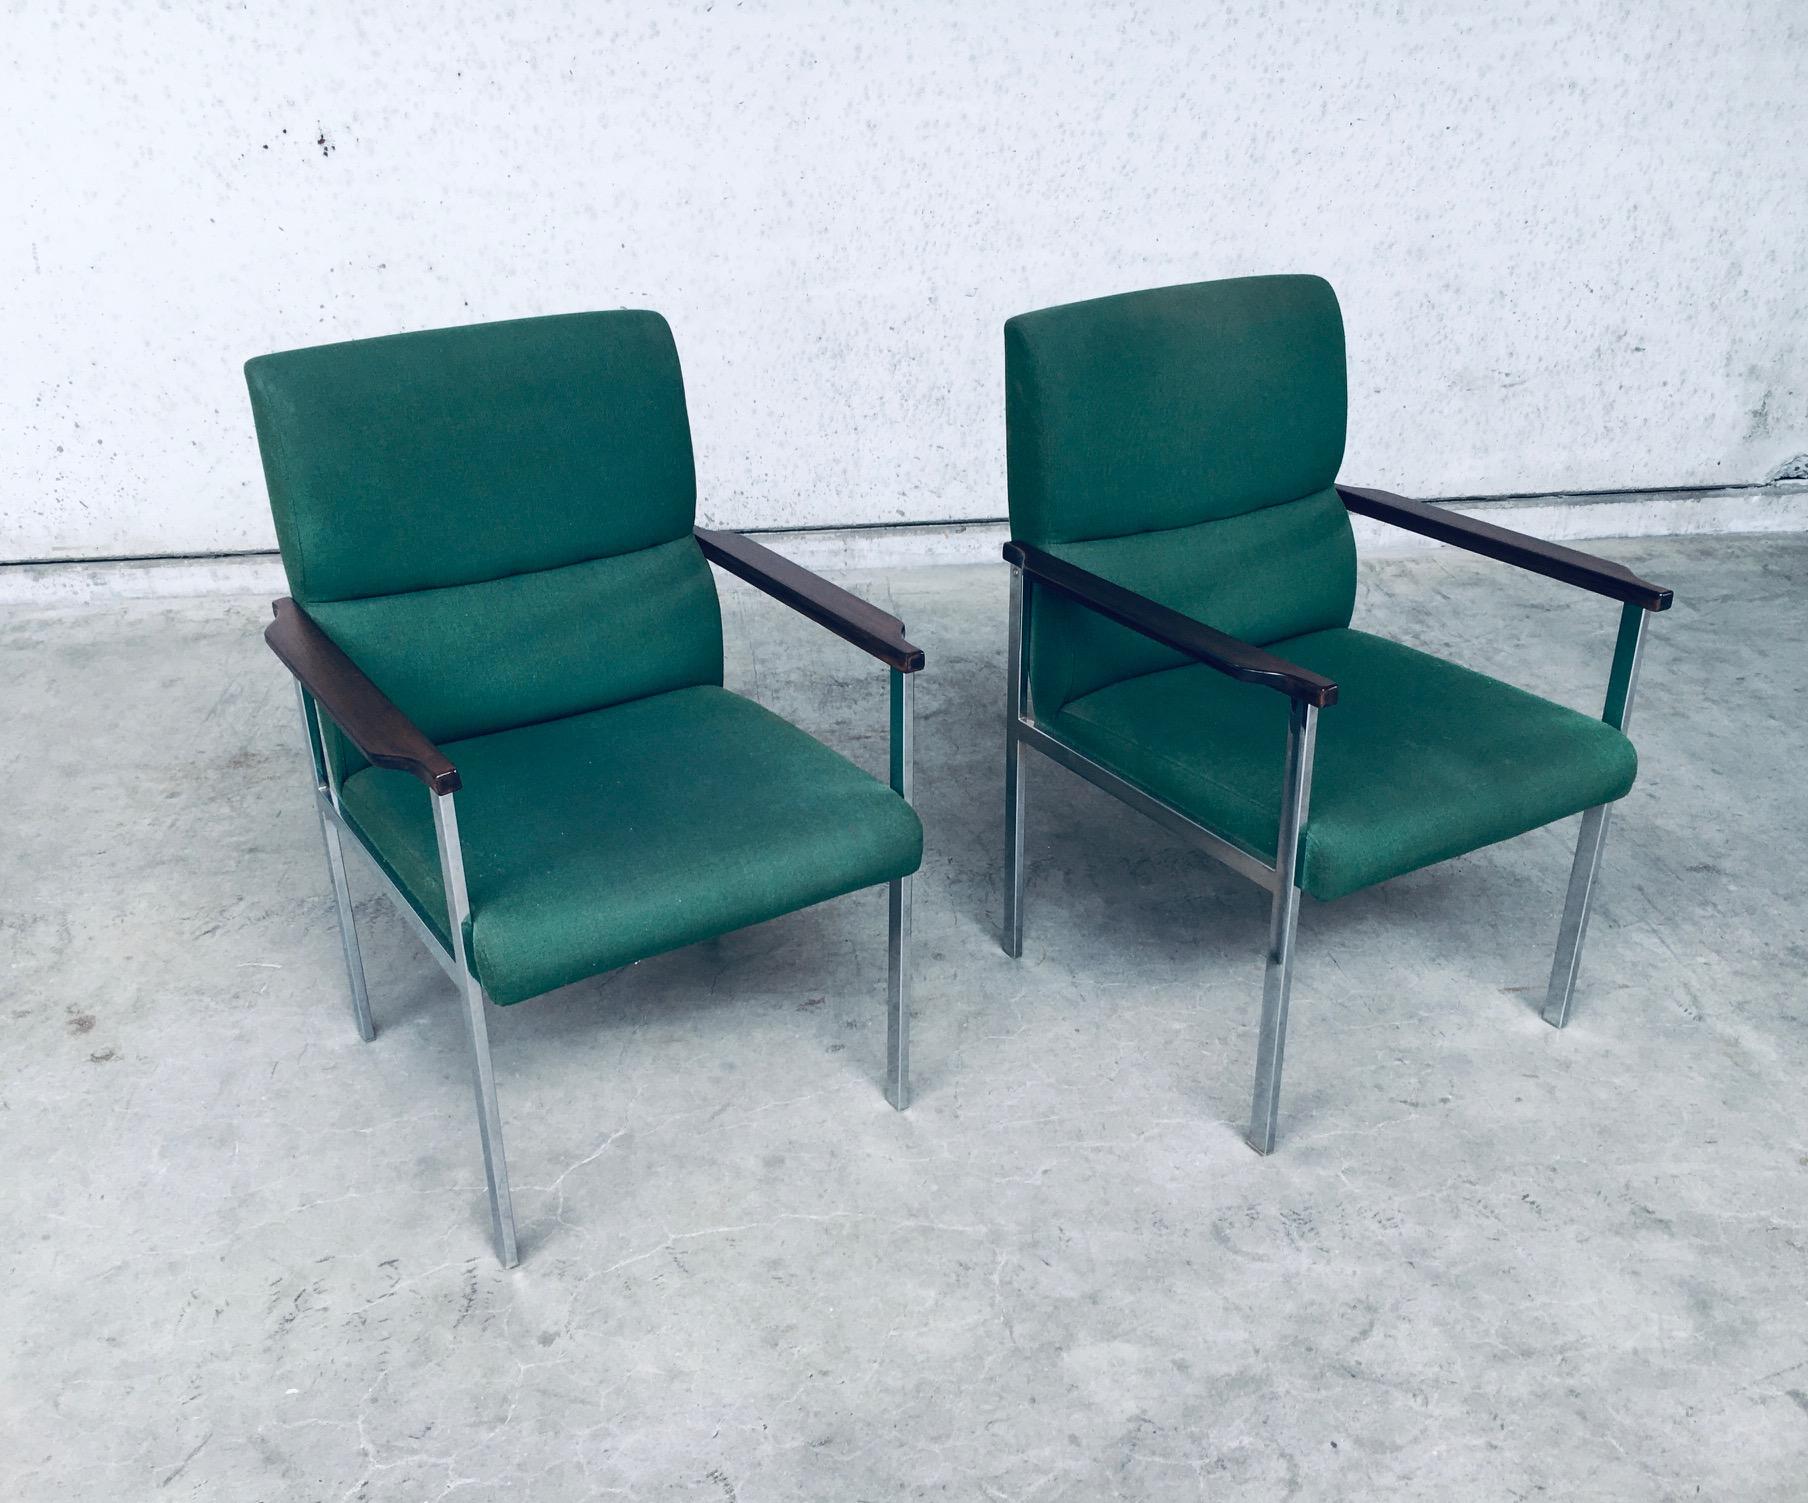 Vintage Midcentury Modern Design pair of Office Arm Chairs by Brune, made in Germany 1960's. Rare Chairs! Brune Label underneath the chair. Original green fabric with Palissander look wood arm rest on chrome metal frame. Both are in very good